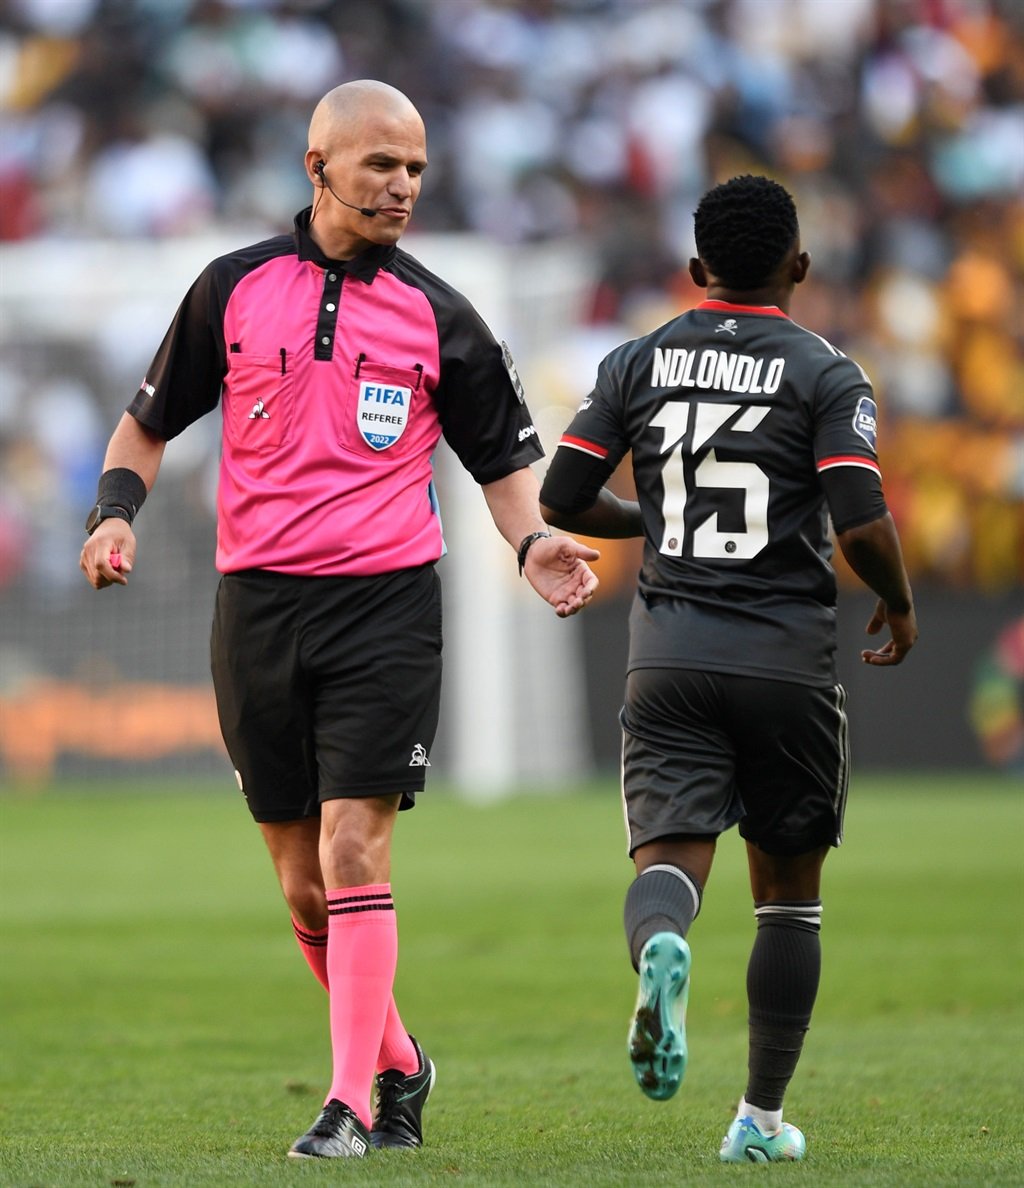 Match Referee Victor Gomes during the DStv Premiership 2022/23 match between Orlando Pirates and Kaizer Chiefs held at at FNB Stadium in Johannesburg on 29 October 2022. Â© Sydney Mahlangu/BackpagePix